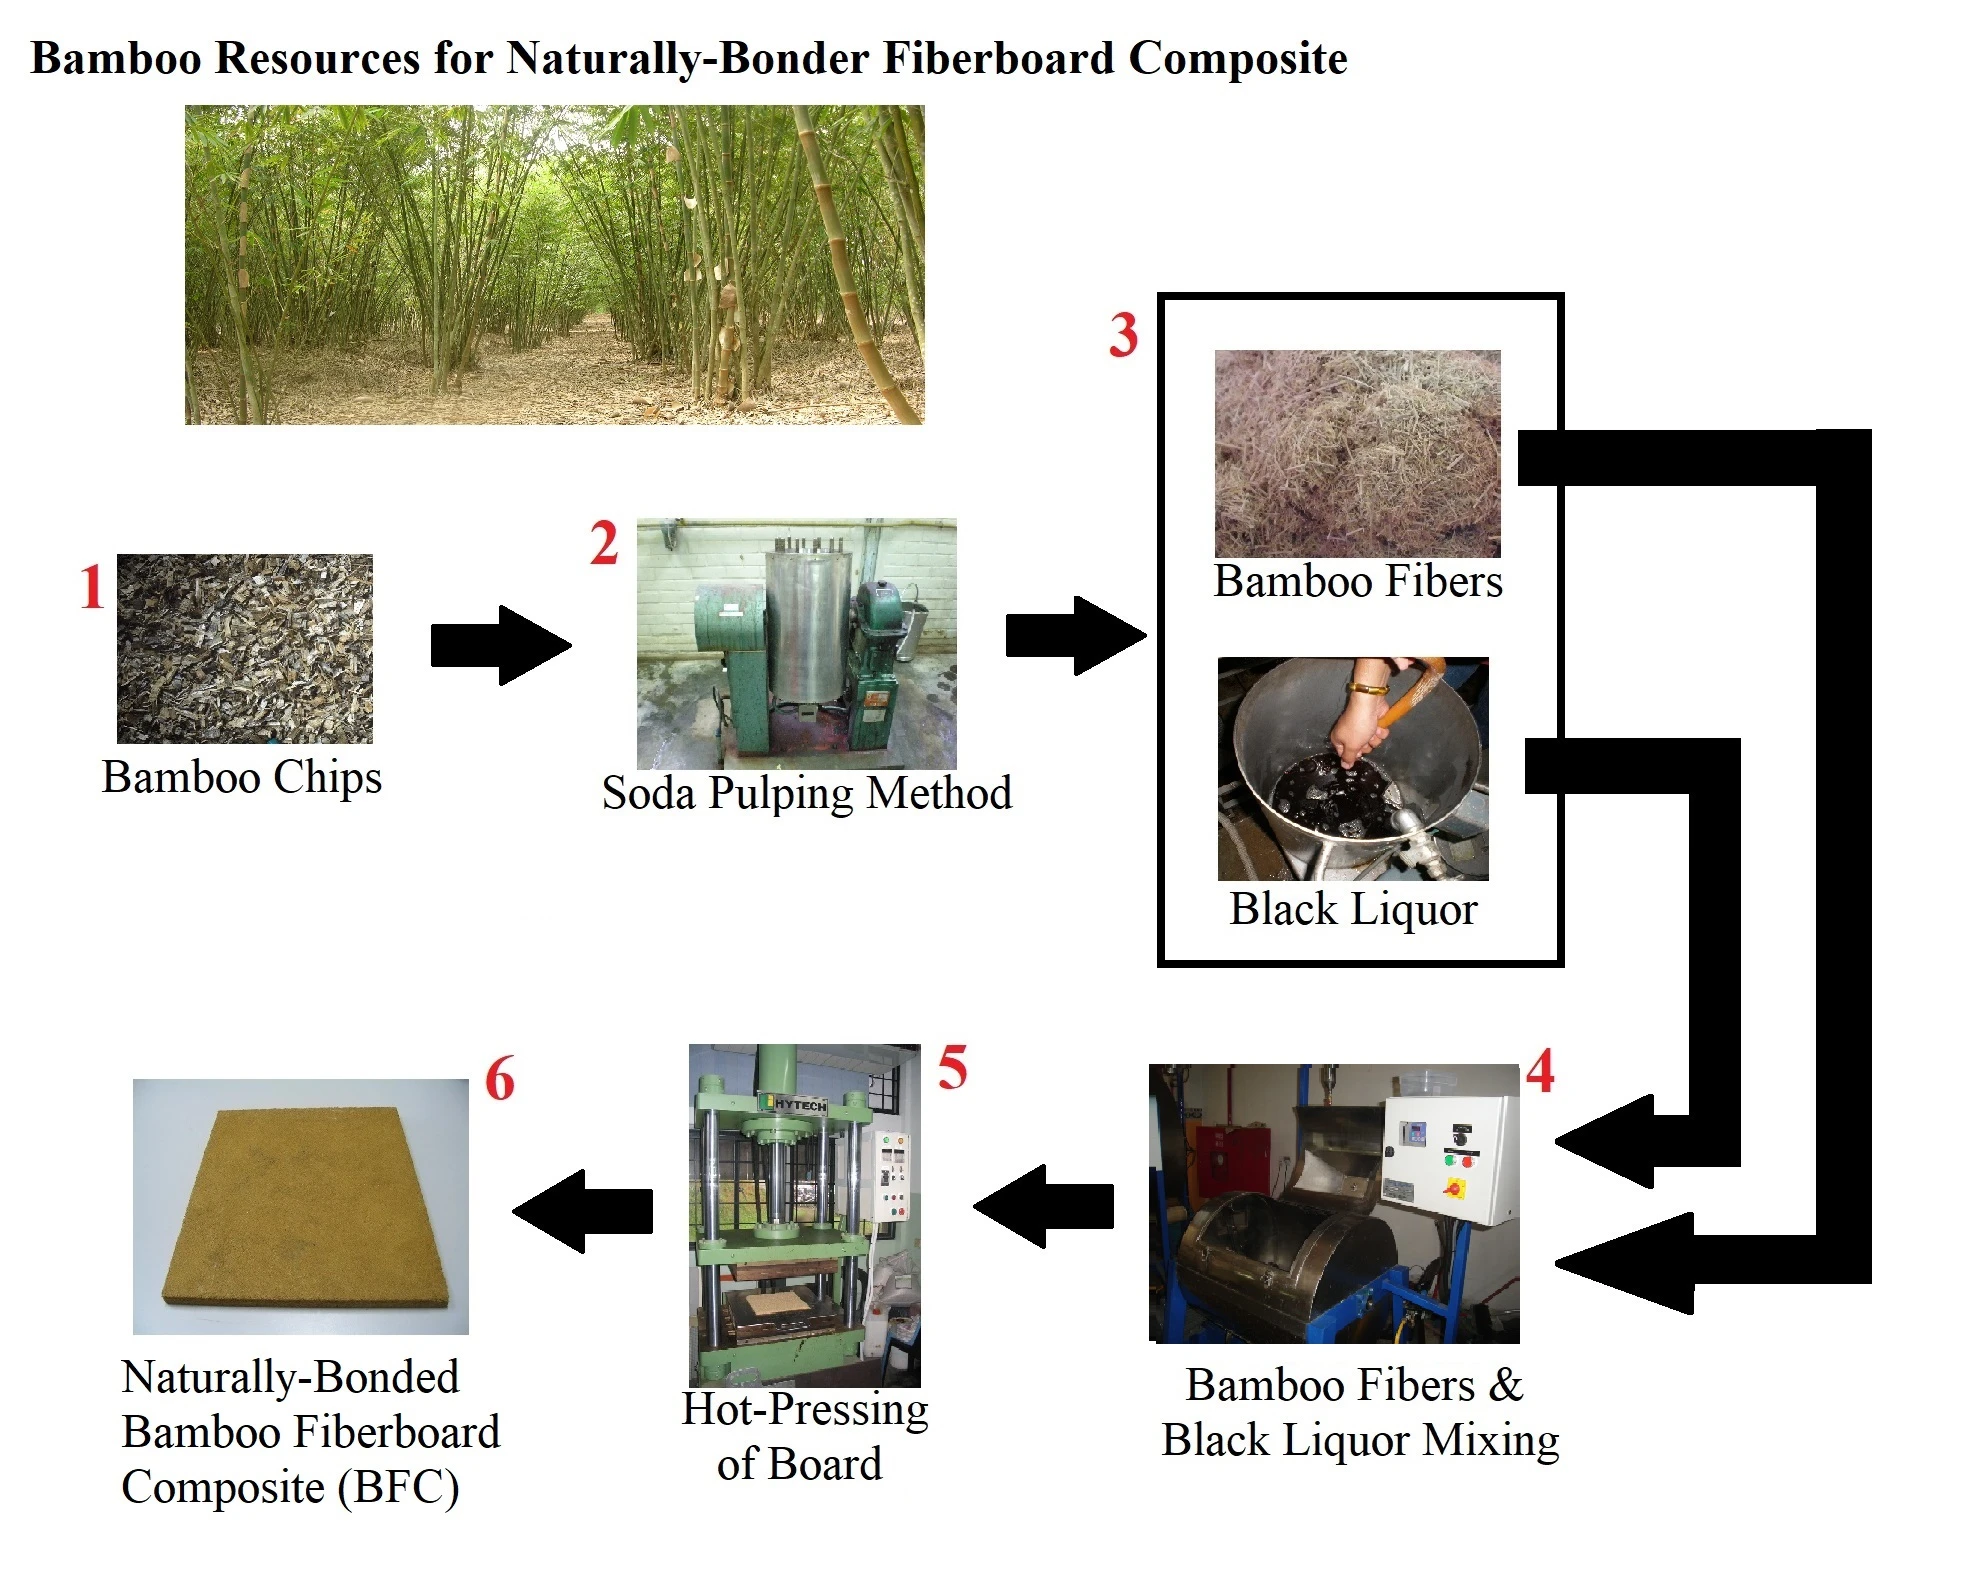 Strength Performance and Microstructure Characteristic of Naturally-Bonded Fiberboard Composite from Malaysian Bamboo (<i>Bambusa vulgaris</i>)